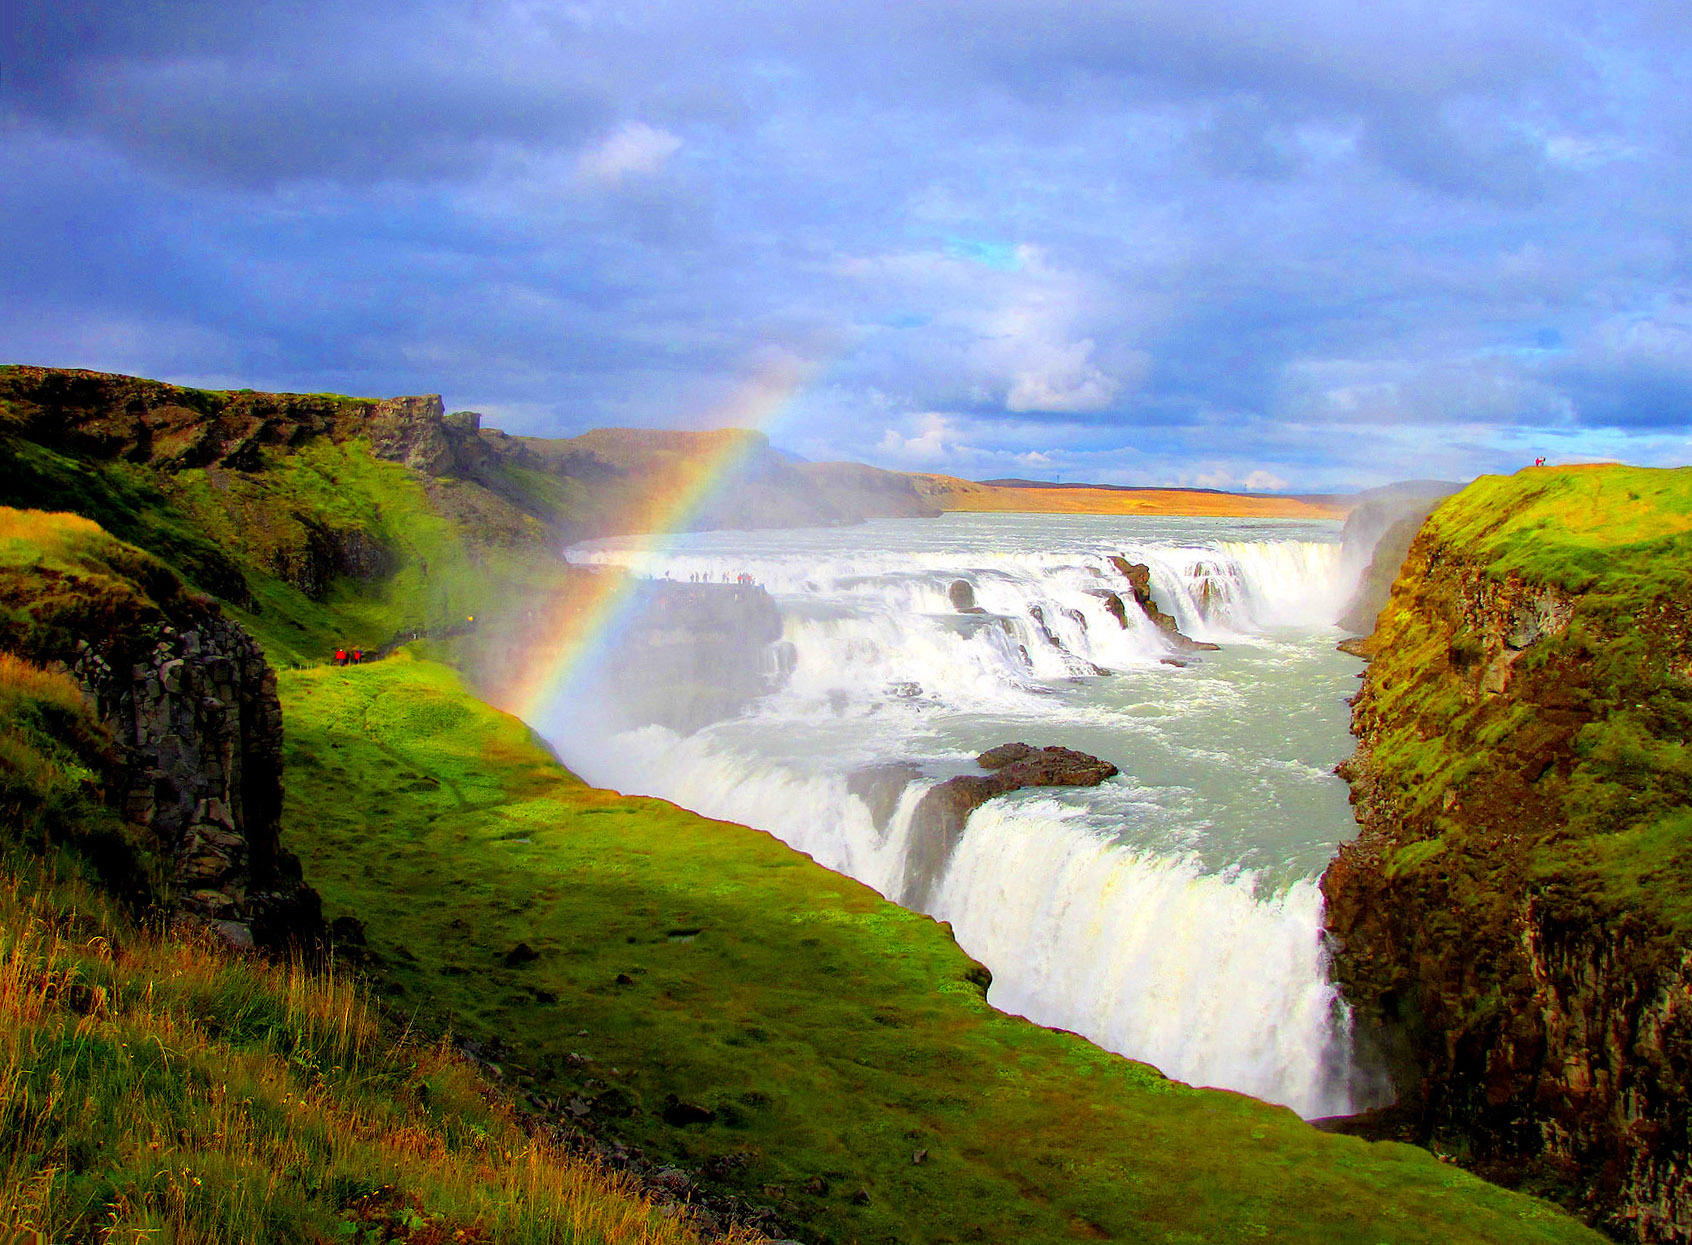 Gullfoss (Golden Falls), Iceland - Beautiful Places to Visit